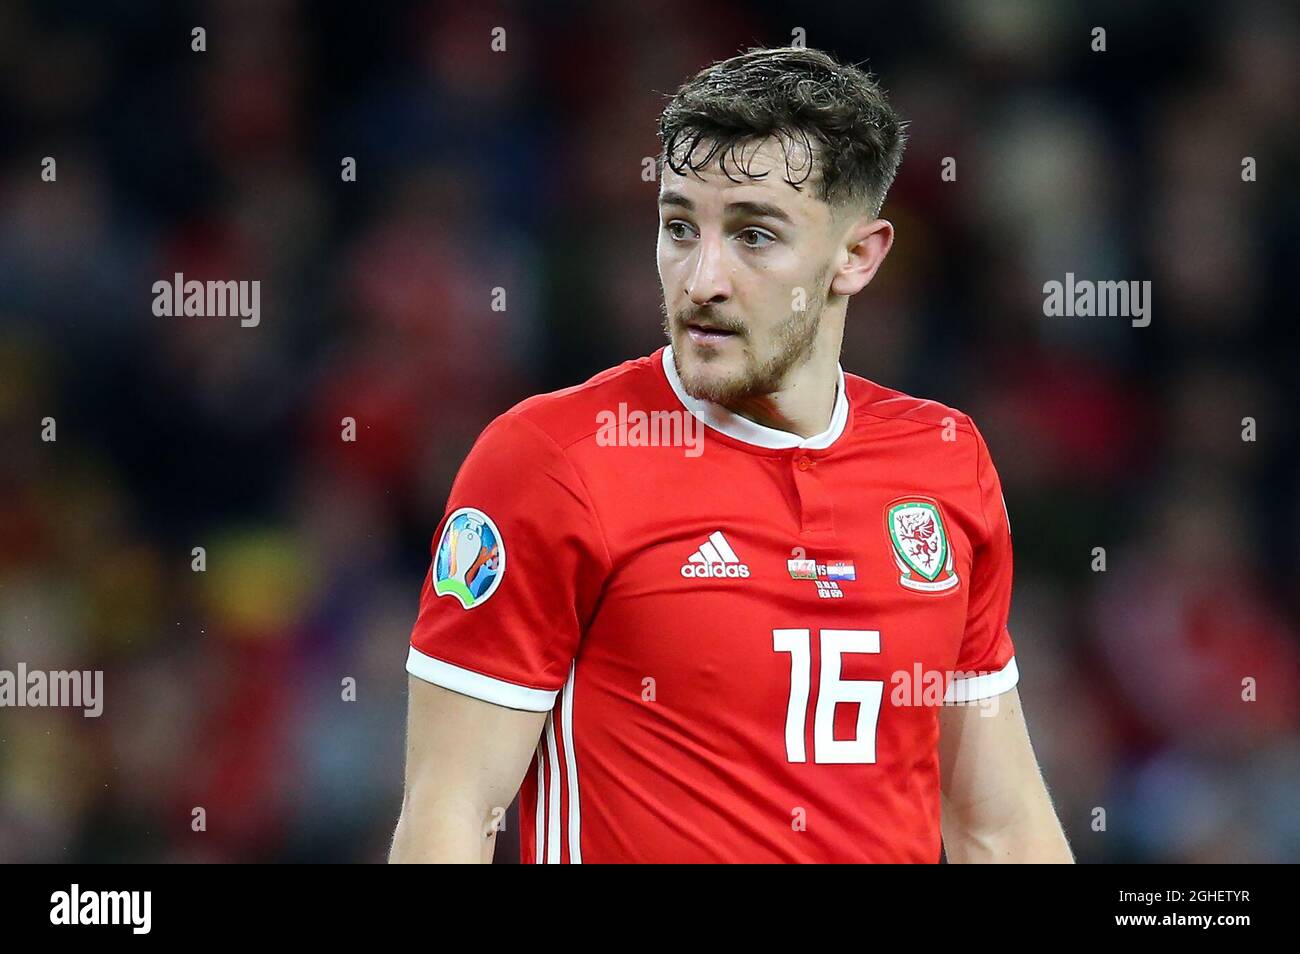 Tom Lockyer of Wales during the UEFA Euro 2020 Qualifying match at the Cardiff City Stadium, Cardiff. Picture date: 13th October 2019. Picture credit should read: James Wilson/Sportimage via PA Images Stock Photo